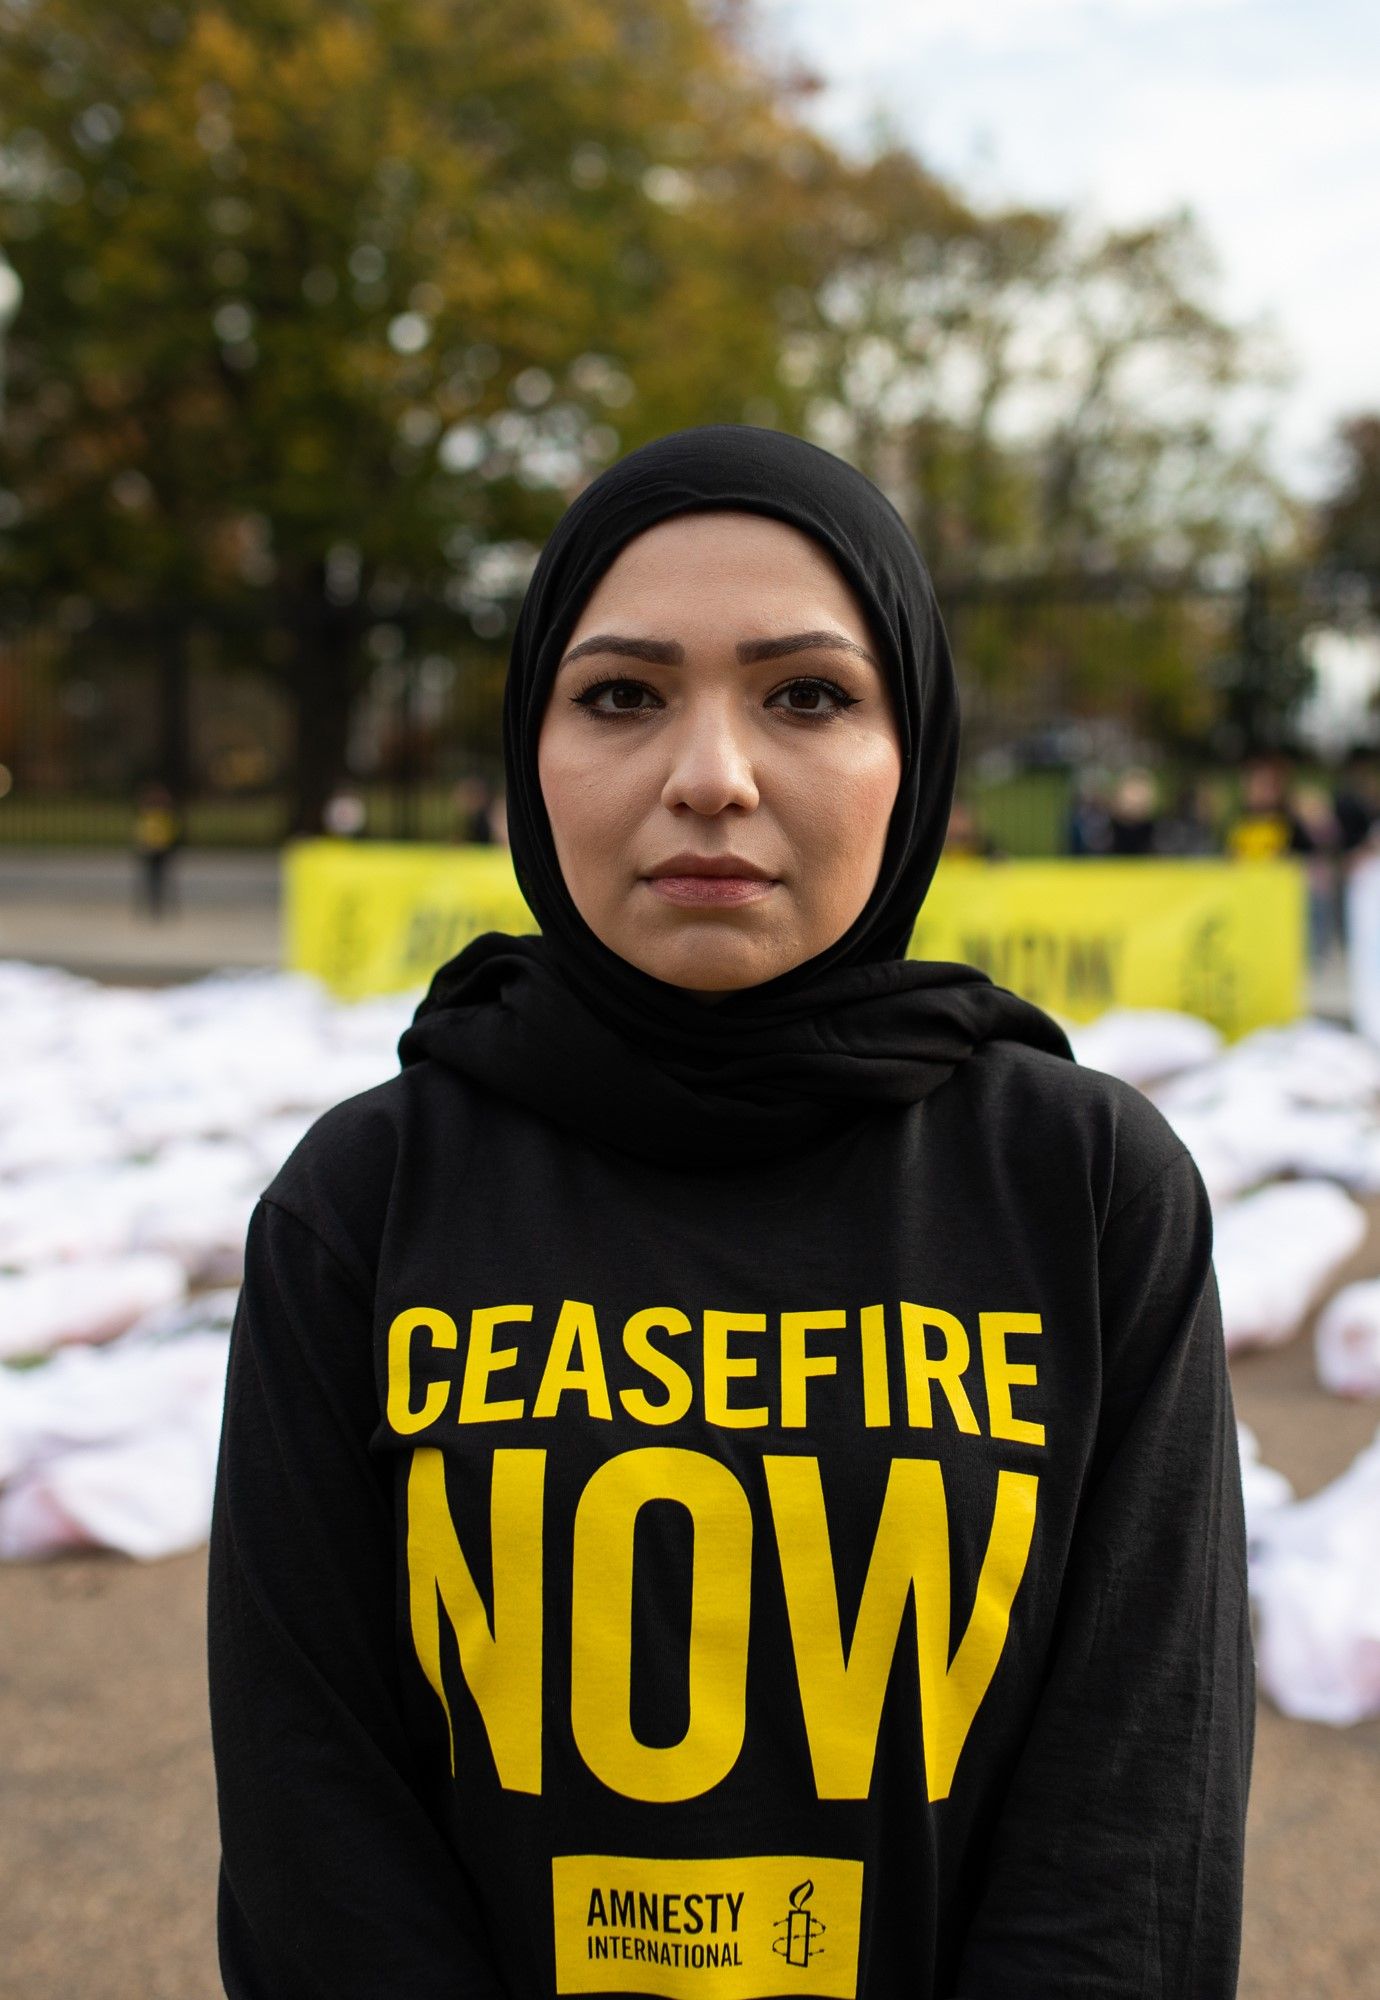 An Amnesty supporter stands wears a sweater reading "ceasefire now"